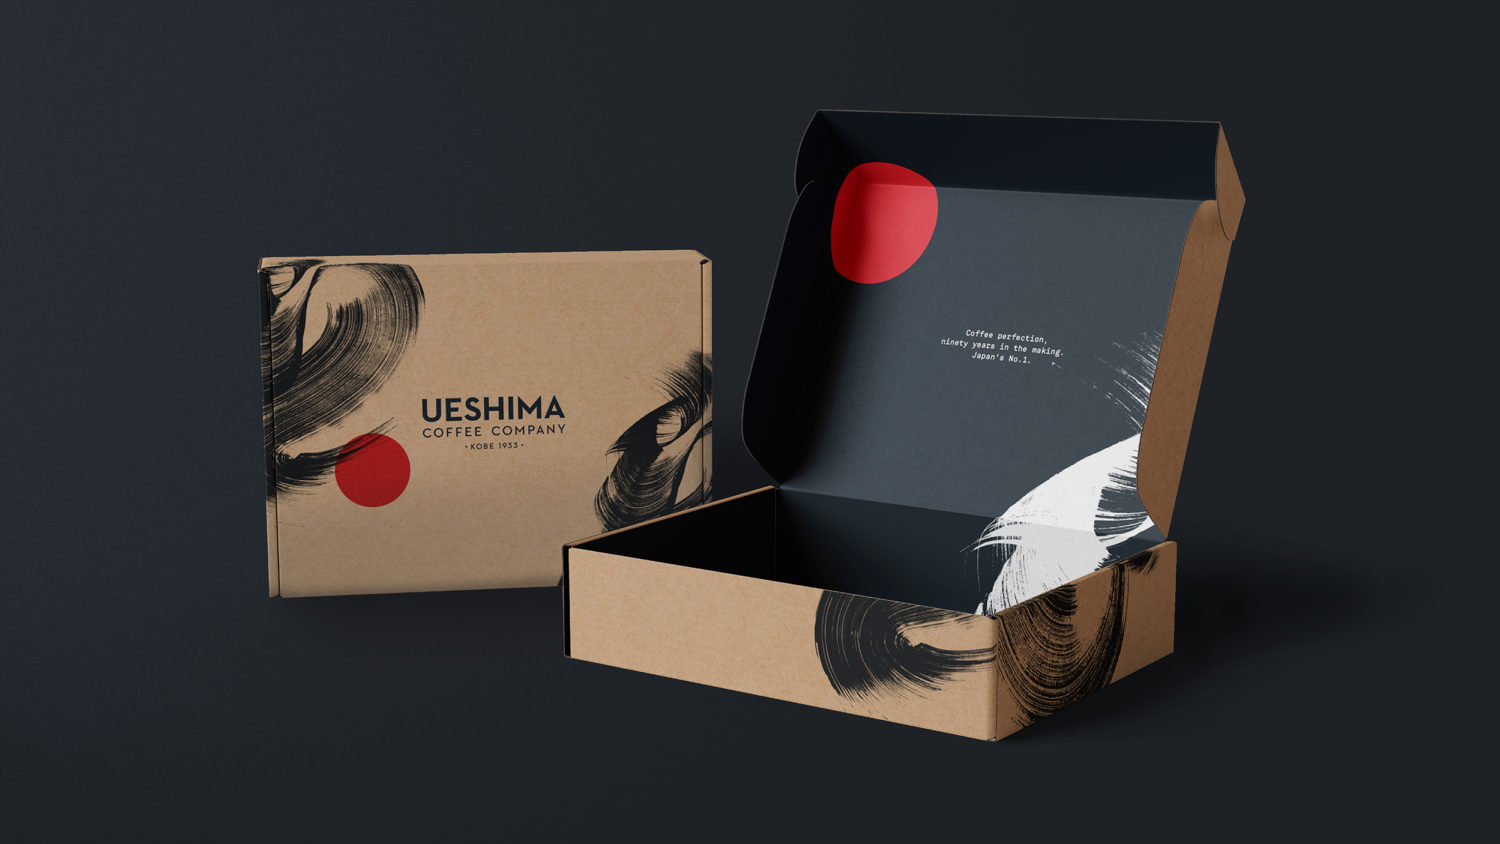 Ueshima Coffee Company: The Pursuit of Perfection branding by The Clearing